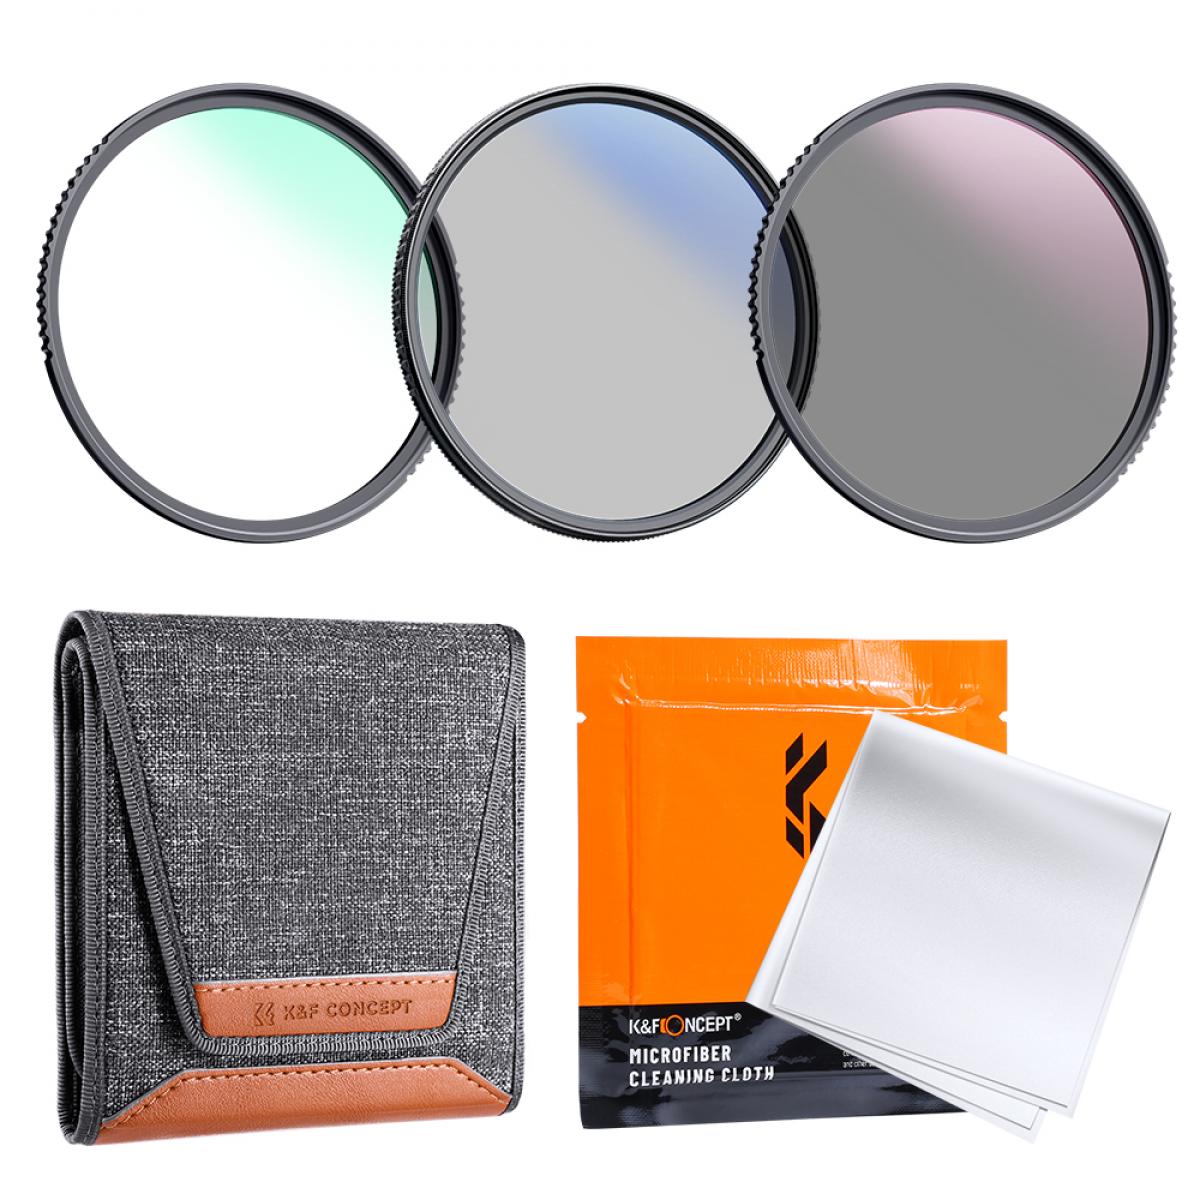 62mm MCUV+CPL+ND4 Lens Filter Kit with Lens Cleaning Cloth and Filter Bag